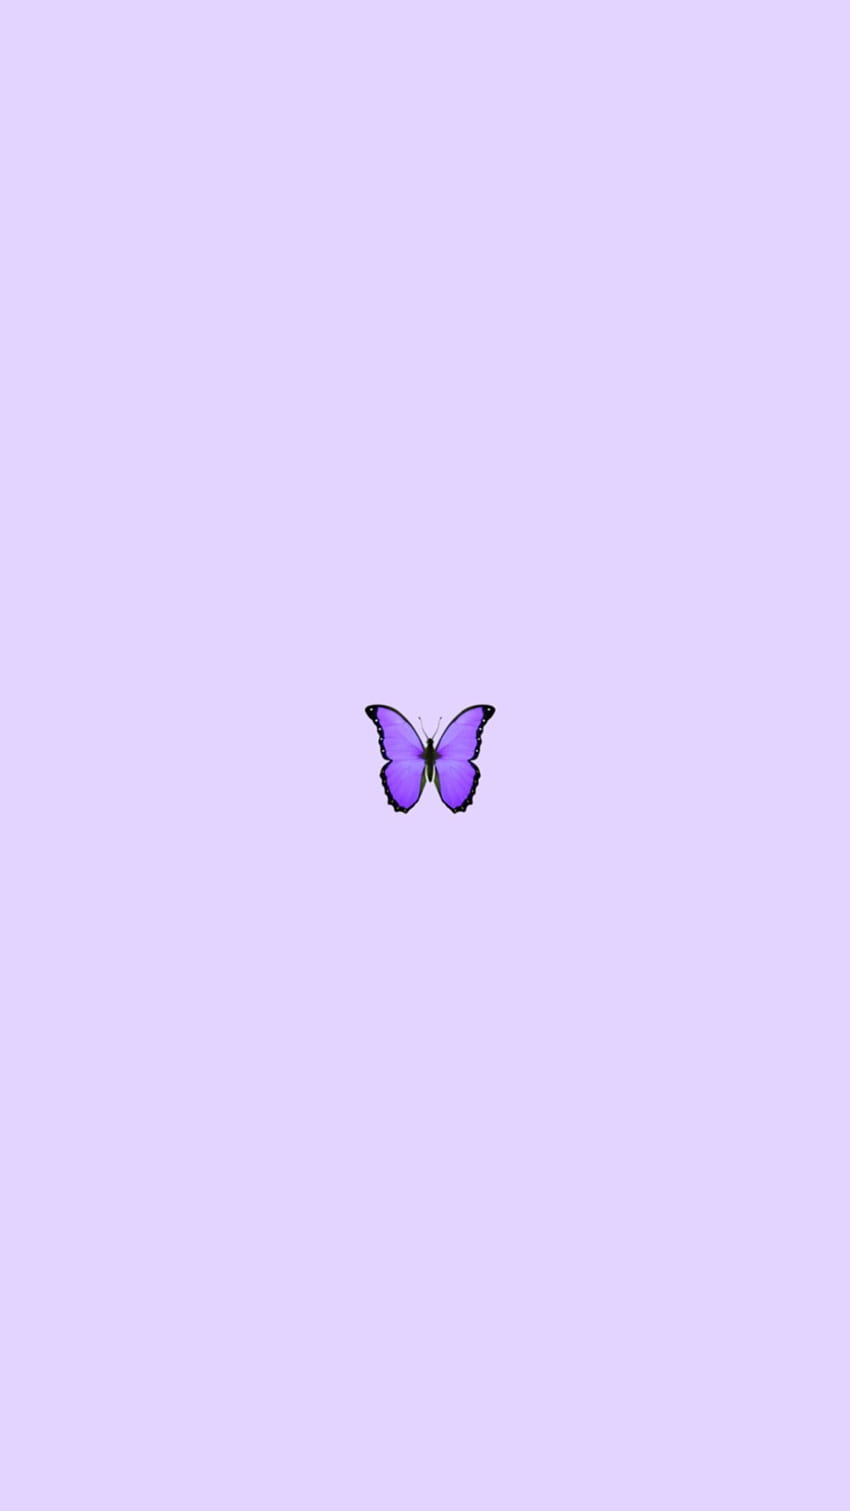 Aesthetic purple sparkle butterfly background   Purple butterfly  wallpaper Purple wallpaper phone Butterfly background